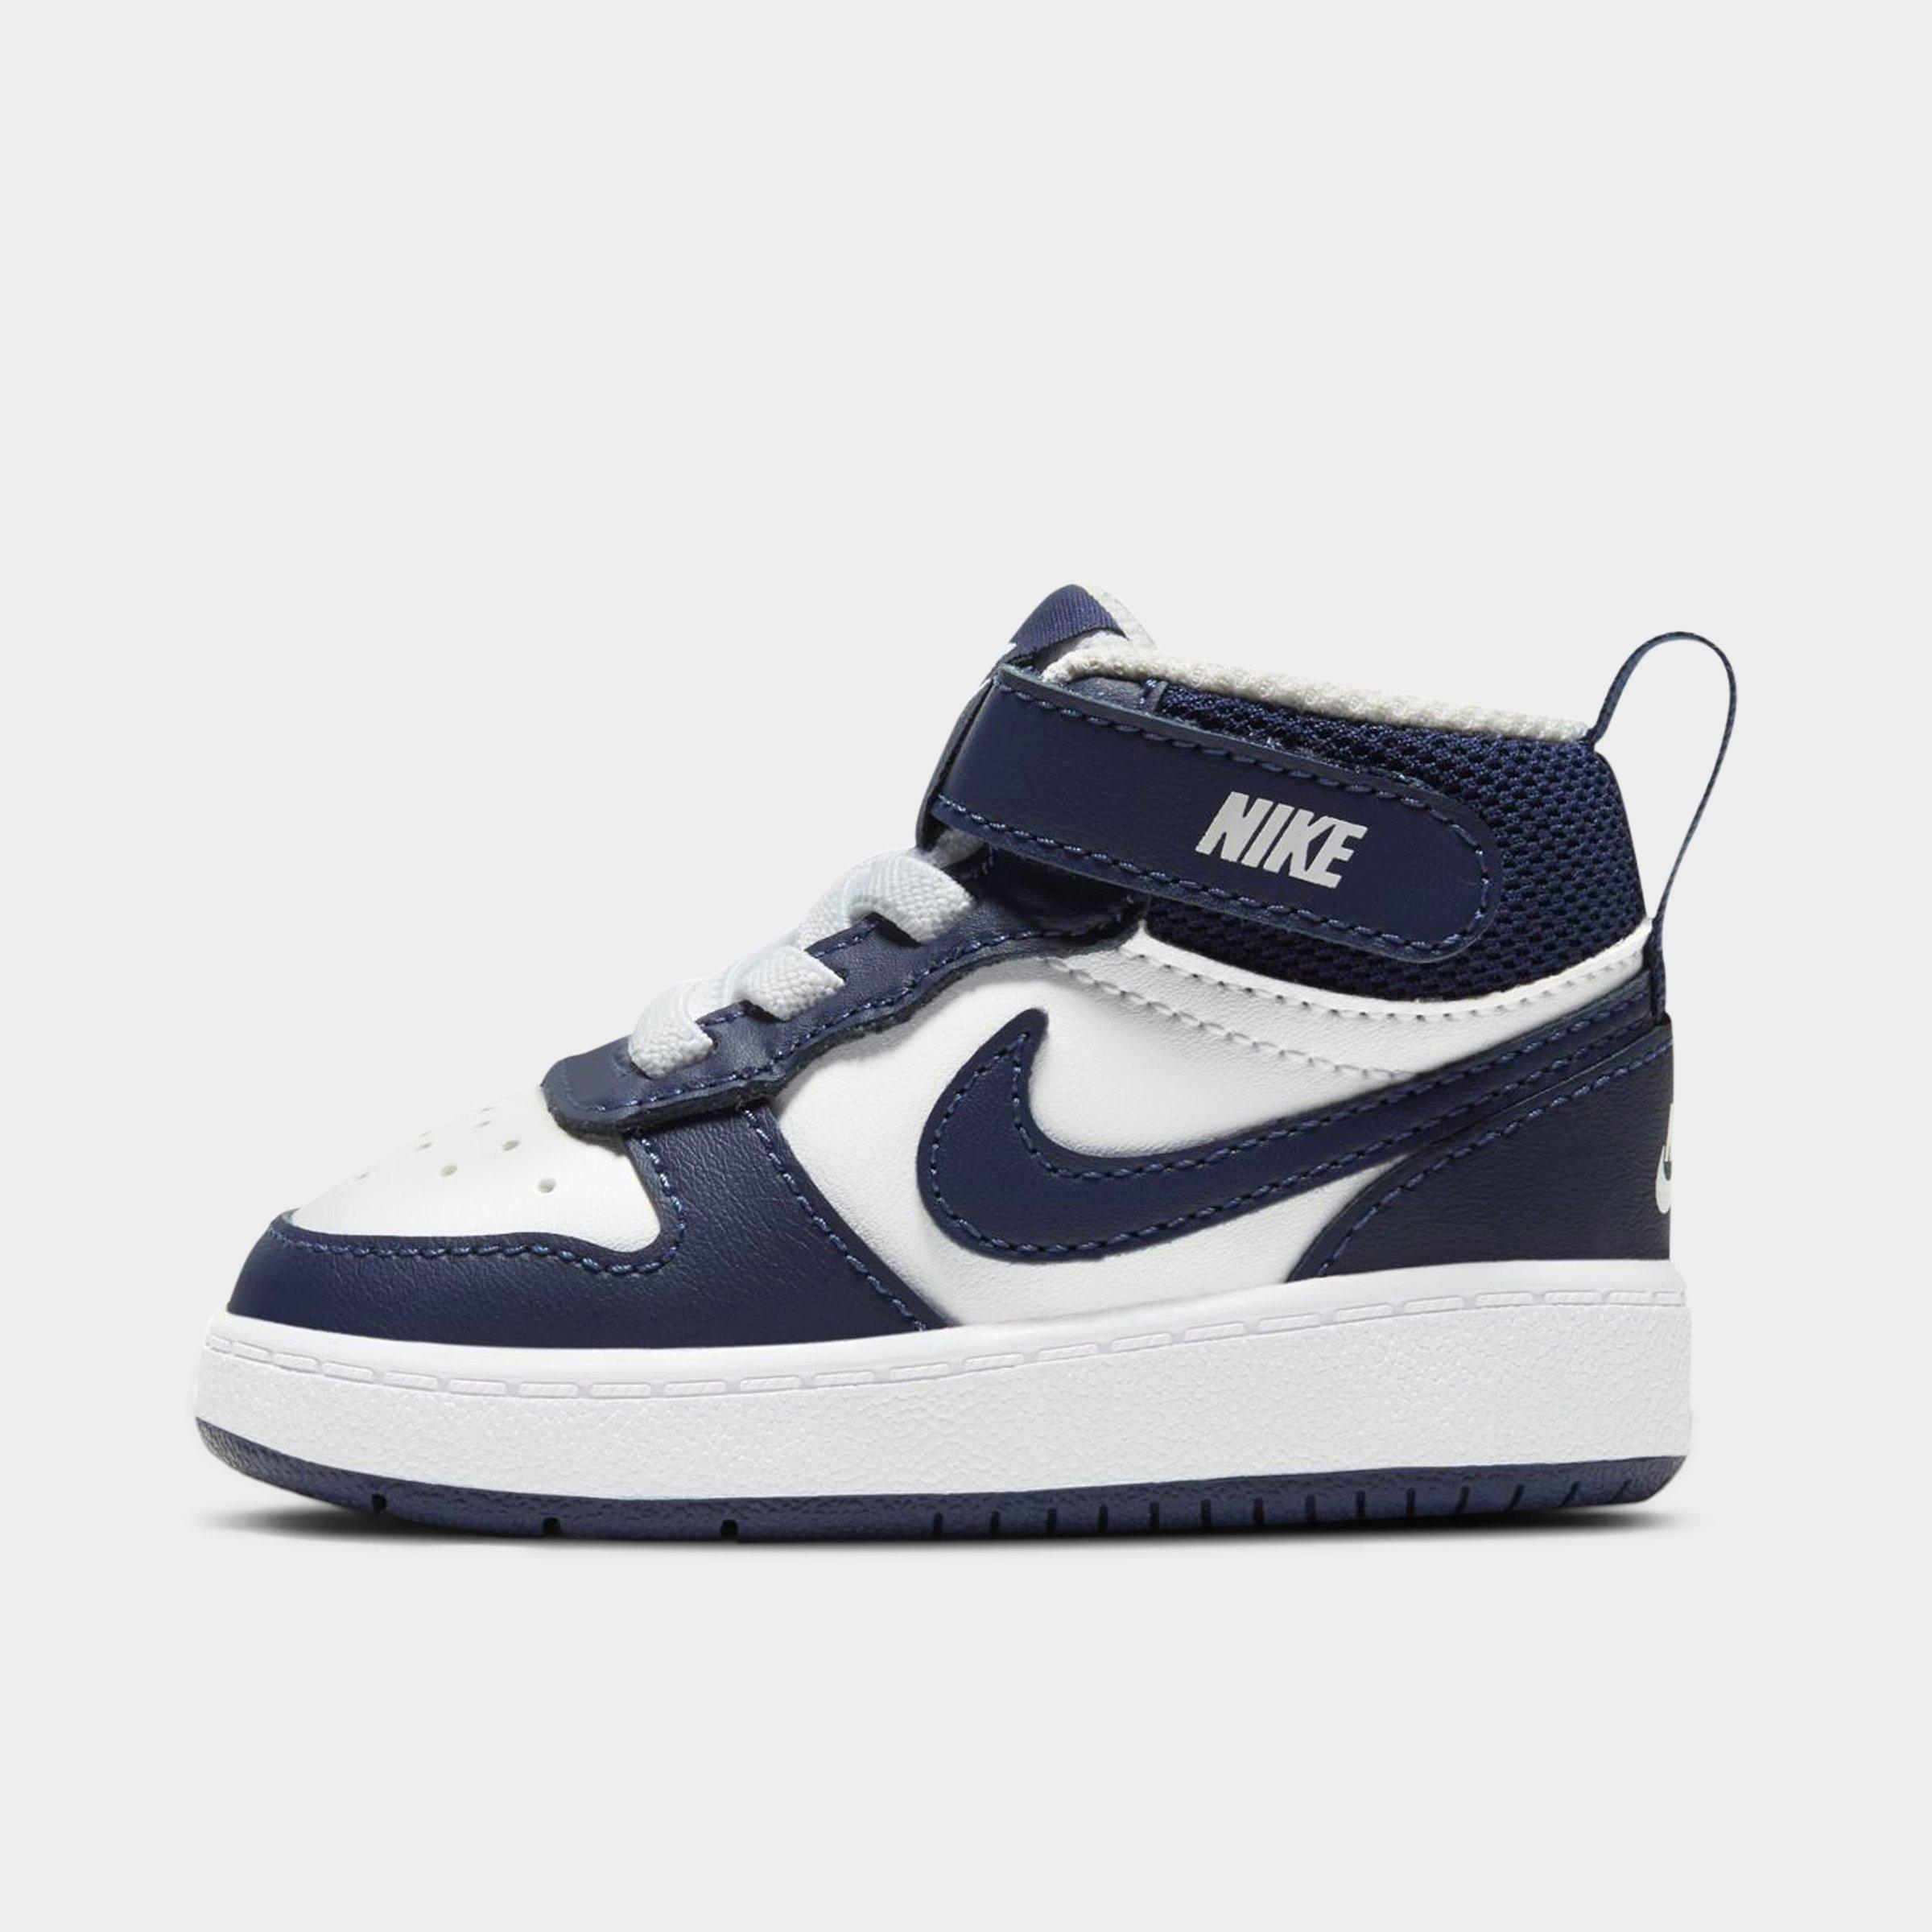 NIKE NIKE KIDS' TODDLER COURT BOROUGH MID 2 CASUAL SHOES